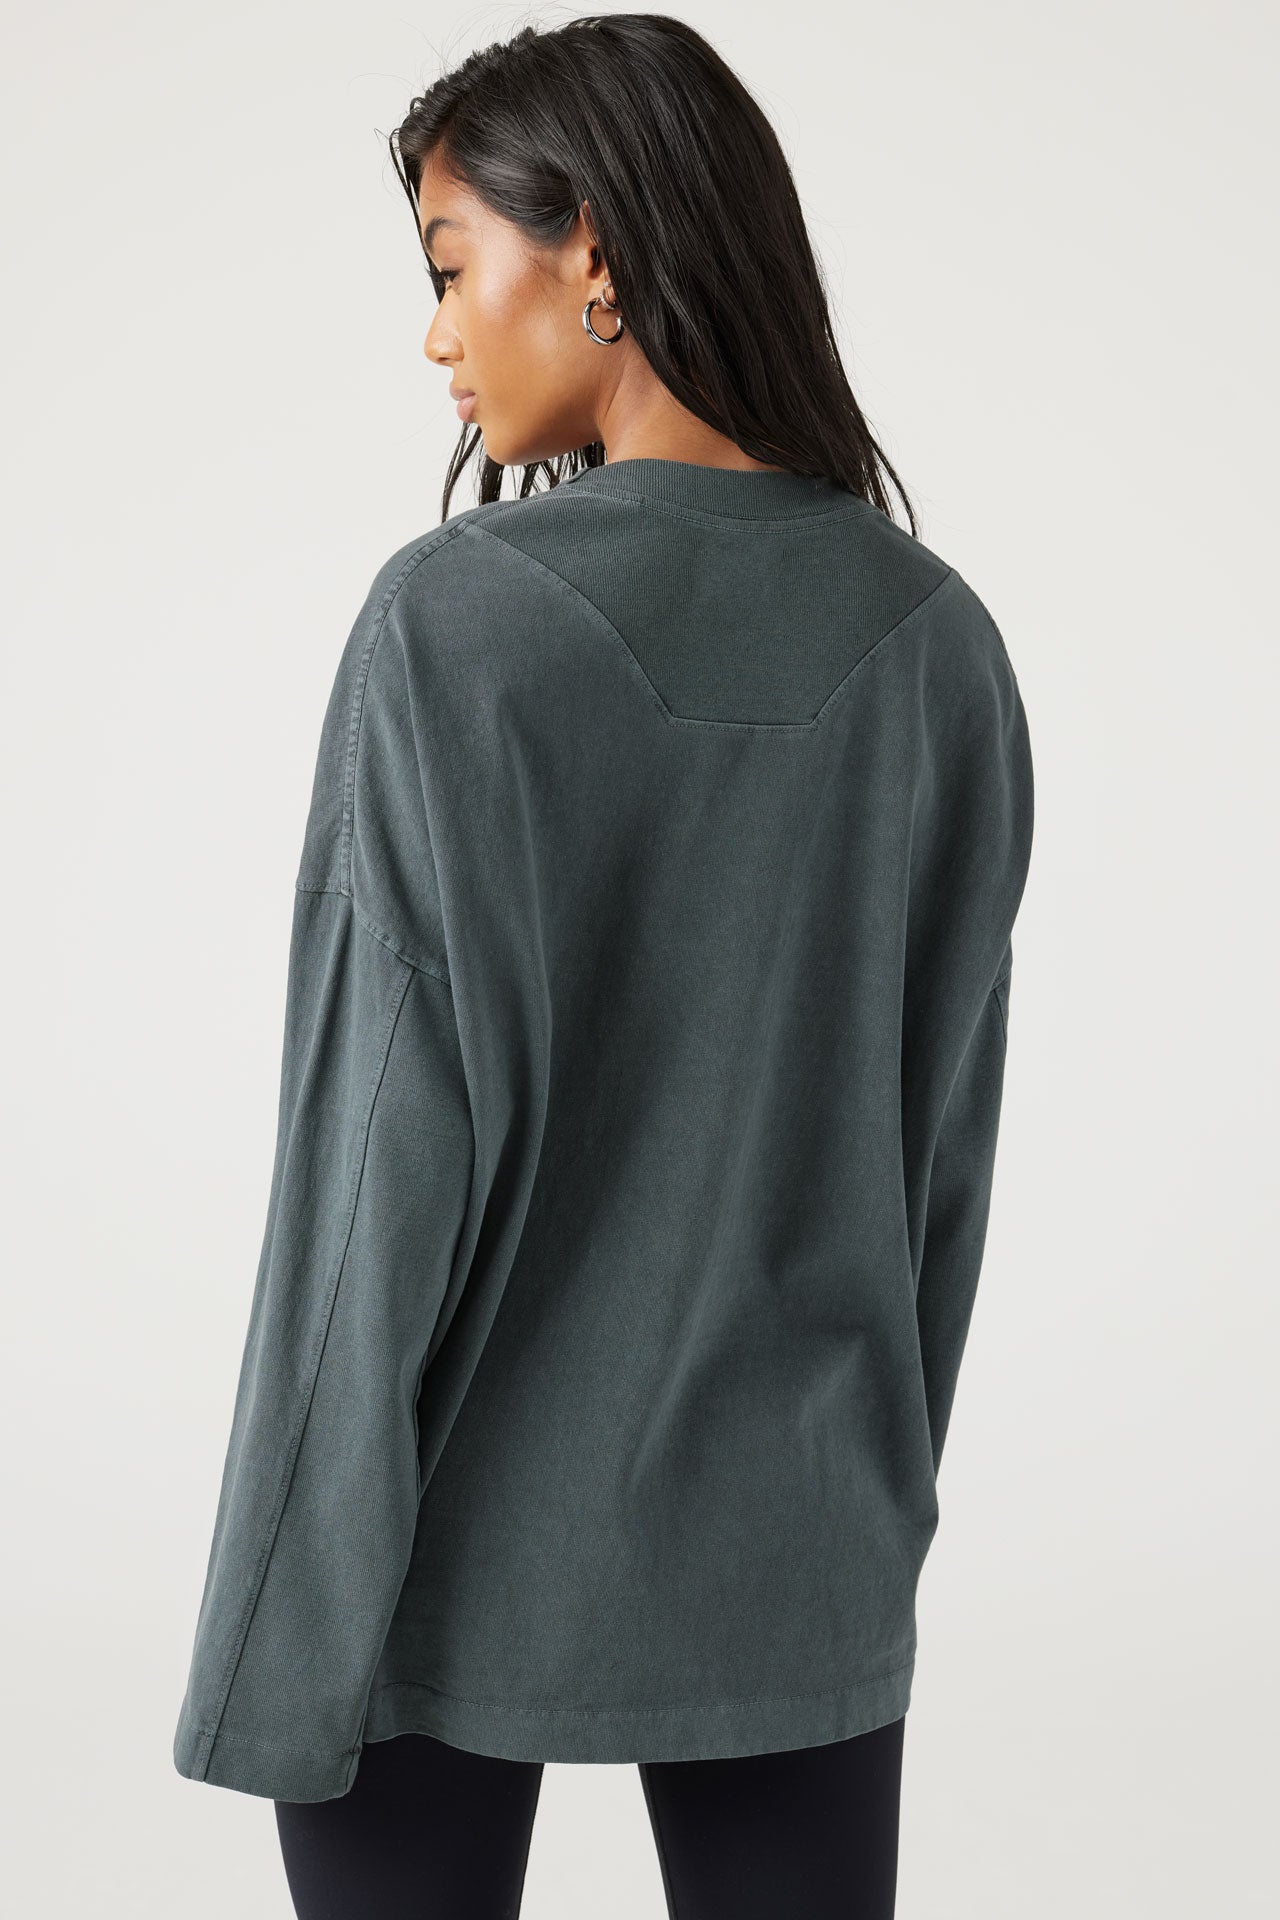 Back view of model posing in oversized evergreen cotton Vintage Long Sleeve top with a crew neckline and ribbed accents at the upper back